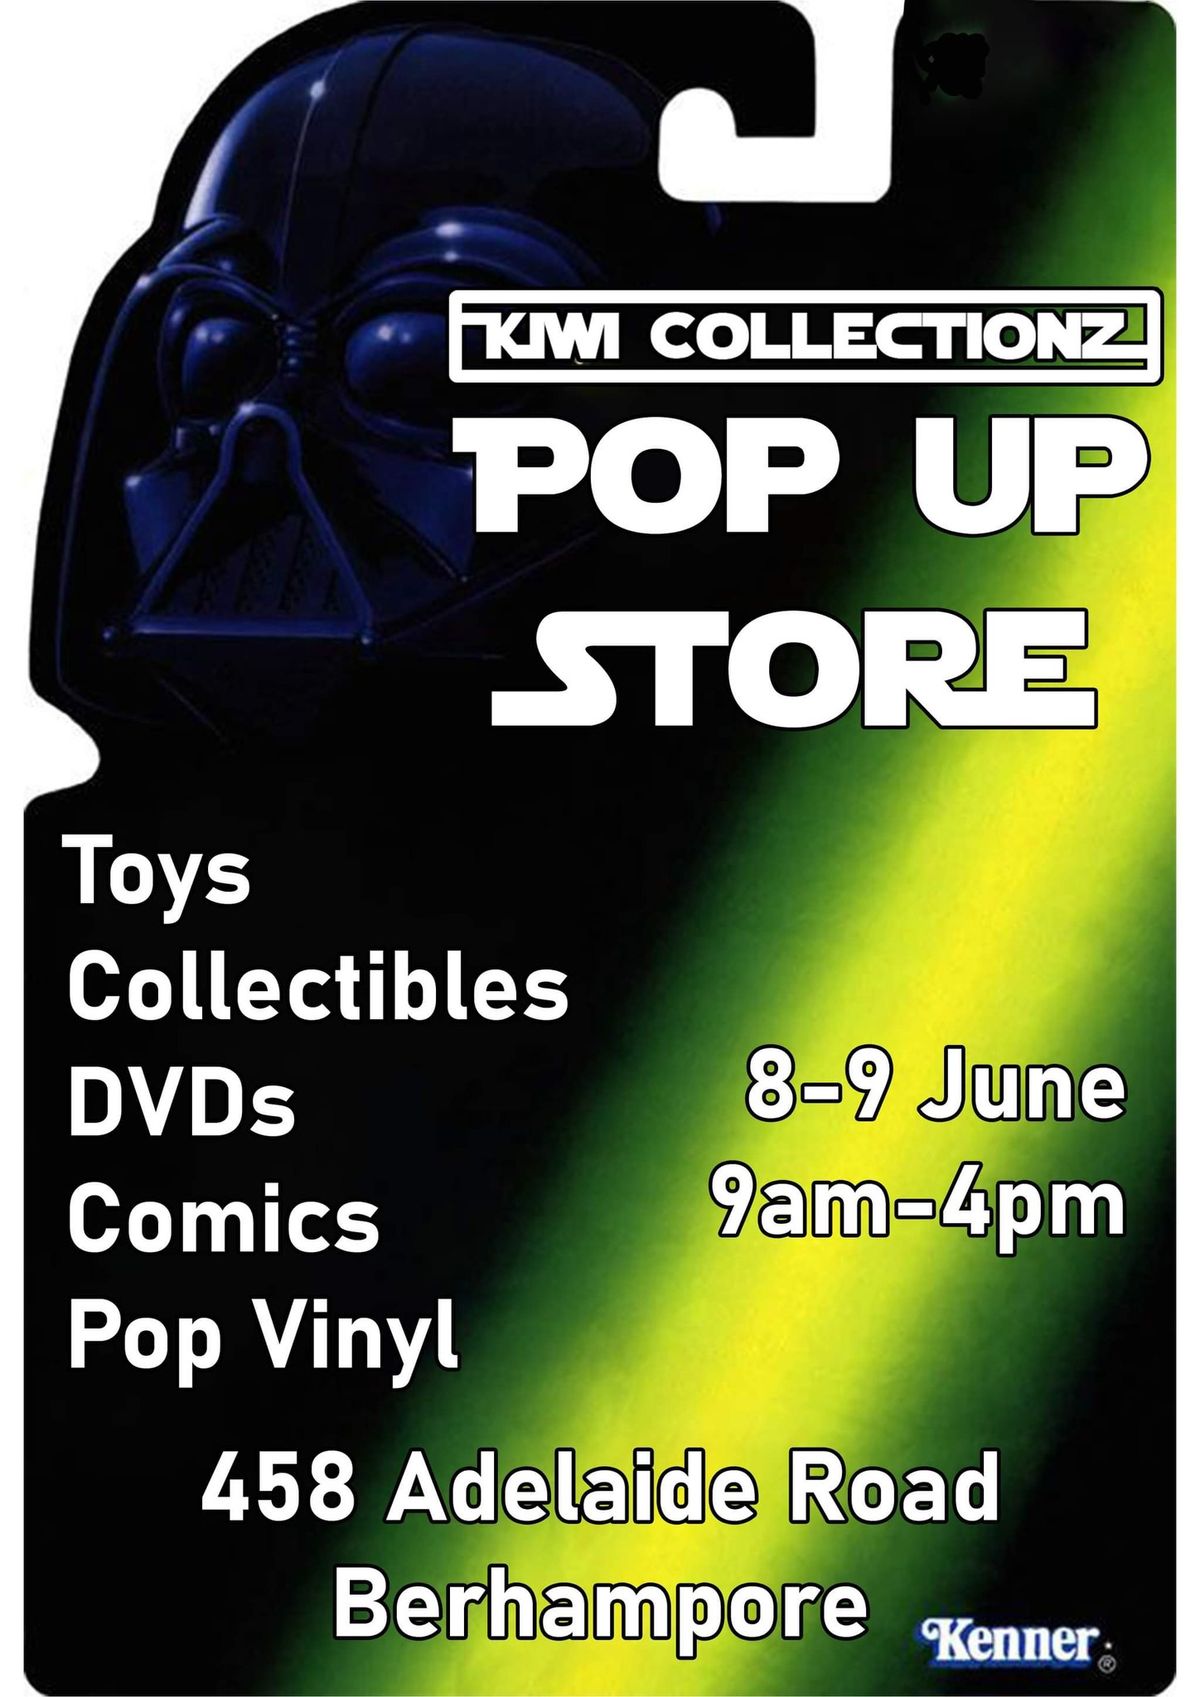 Kiwi Collectionz Pop Up Store